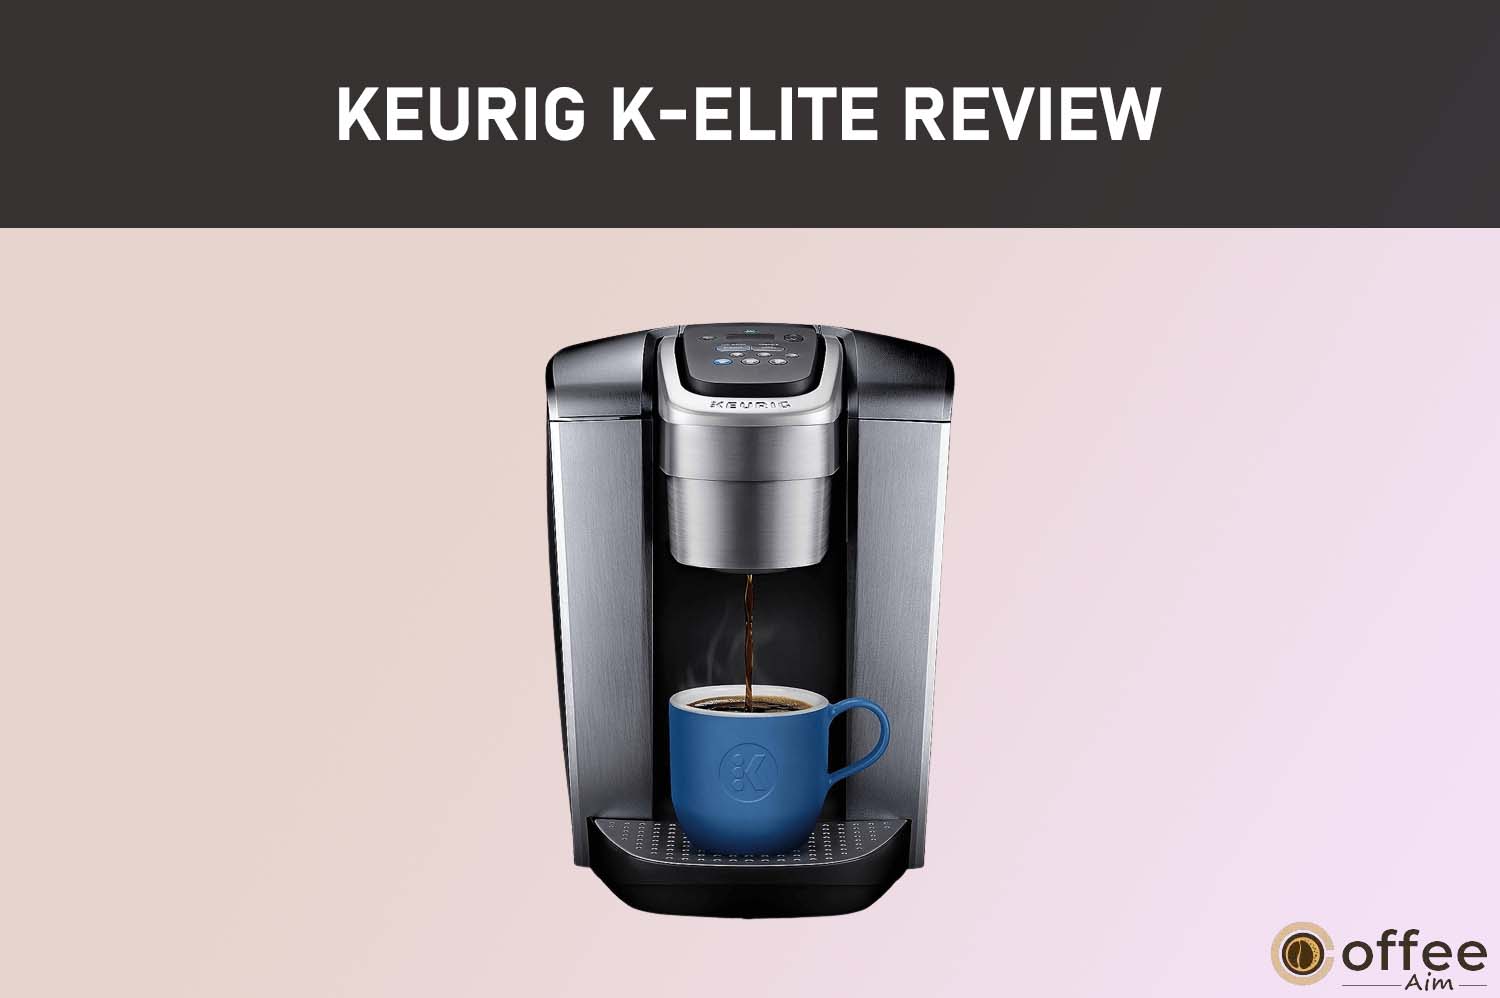 Featured image for the article "Keurig K-Elite Review"